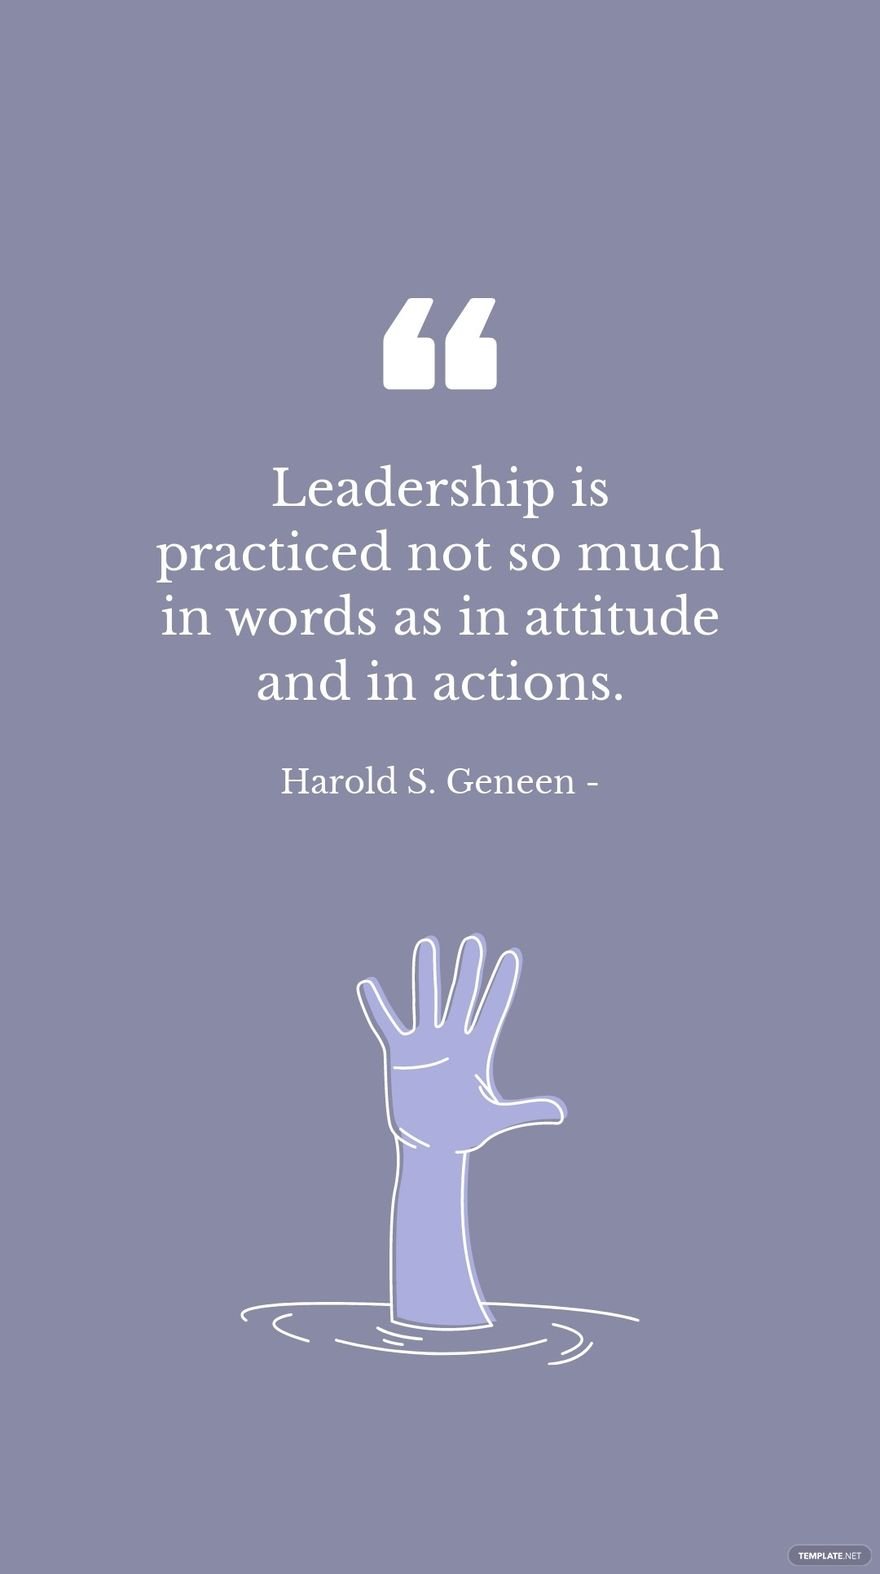 Free Harold S. Geneen - Leadership is practiced not so much in words as in attitude and in actions.